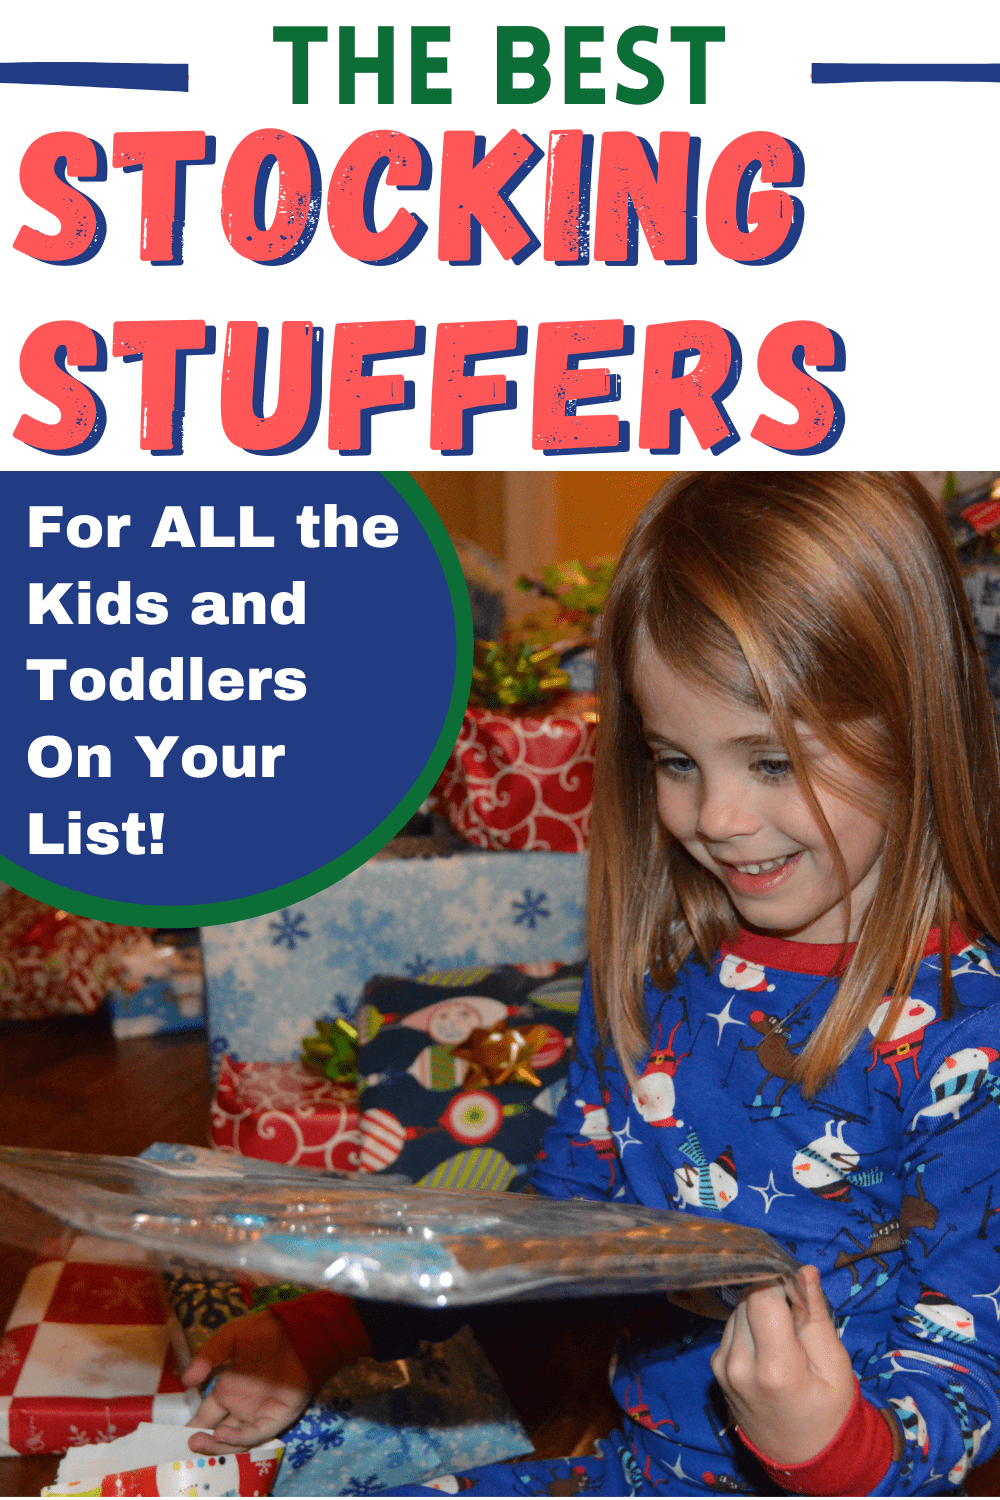 Looking for the best stocking stuffers for kids? I've got you covered with great stocking stuffer ideas under $20 for kids and for toddlers!